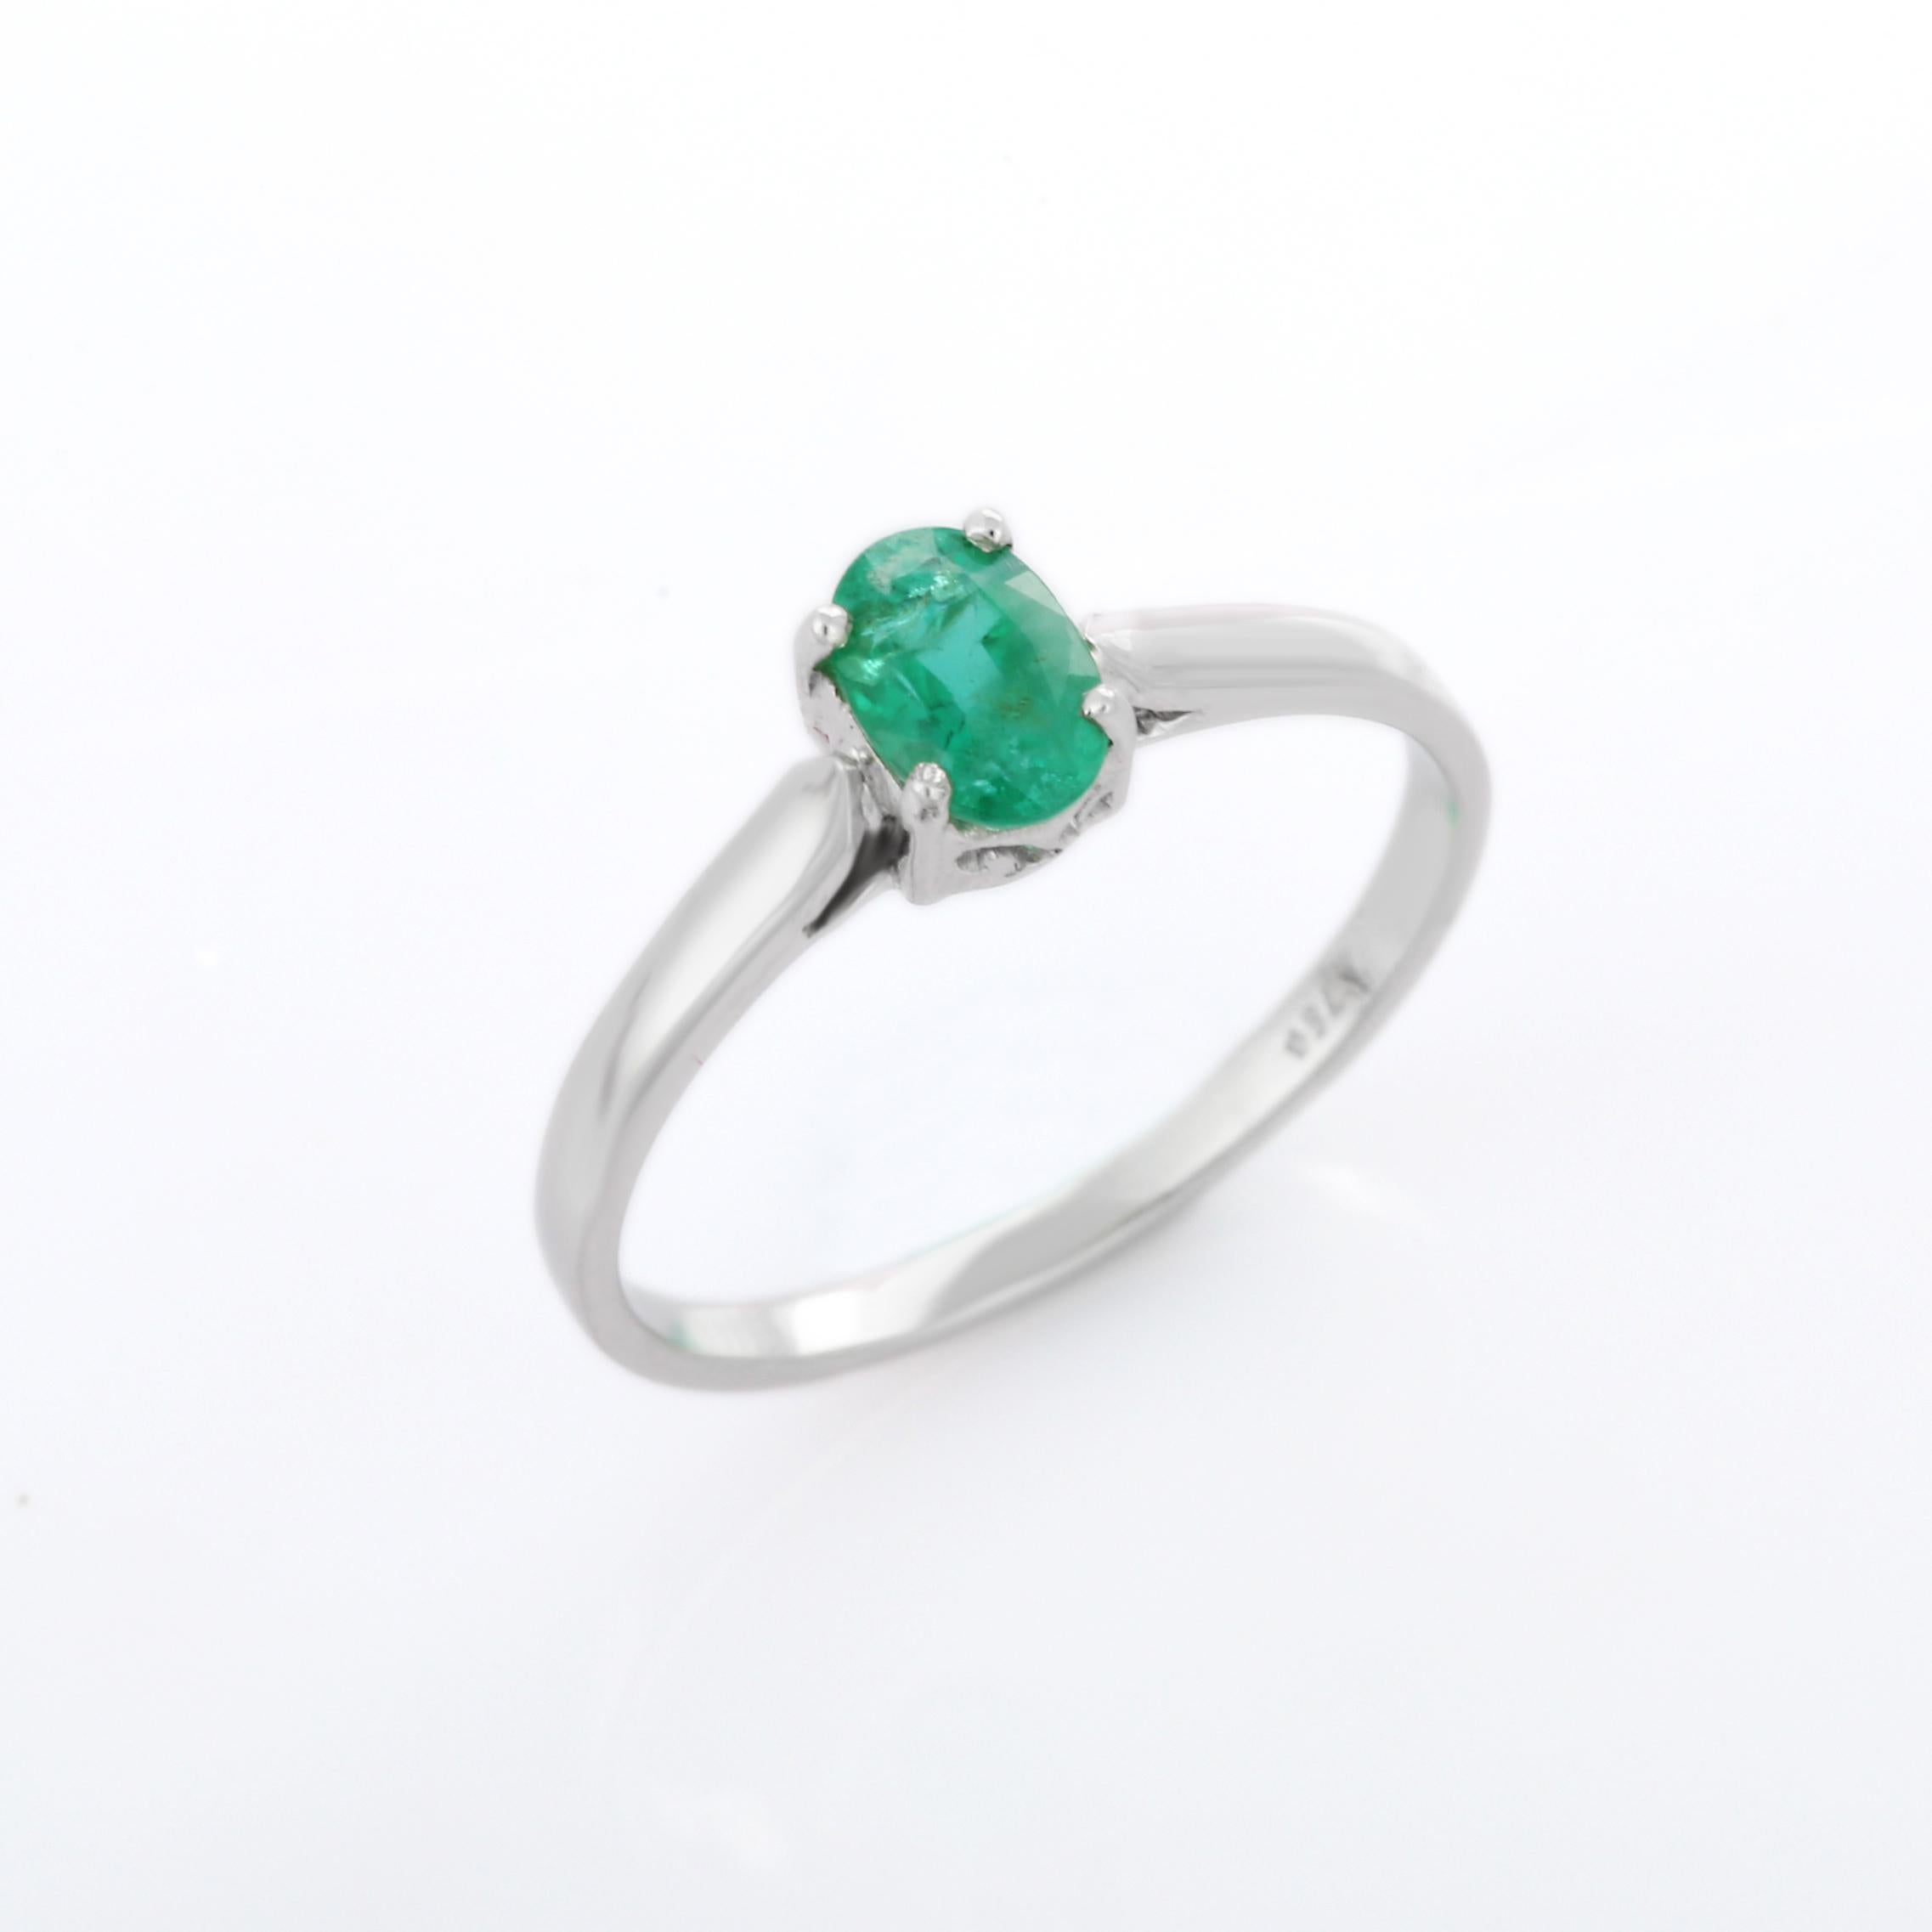 For Sale:  18K White Gold Minimalist Oval Cut Emerald Gemstone Stackable Solitaire Ring  2